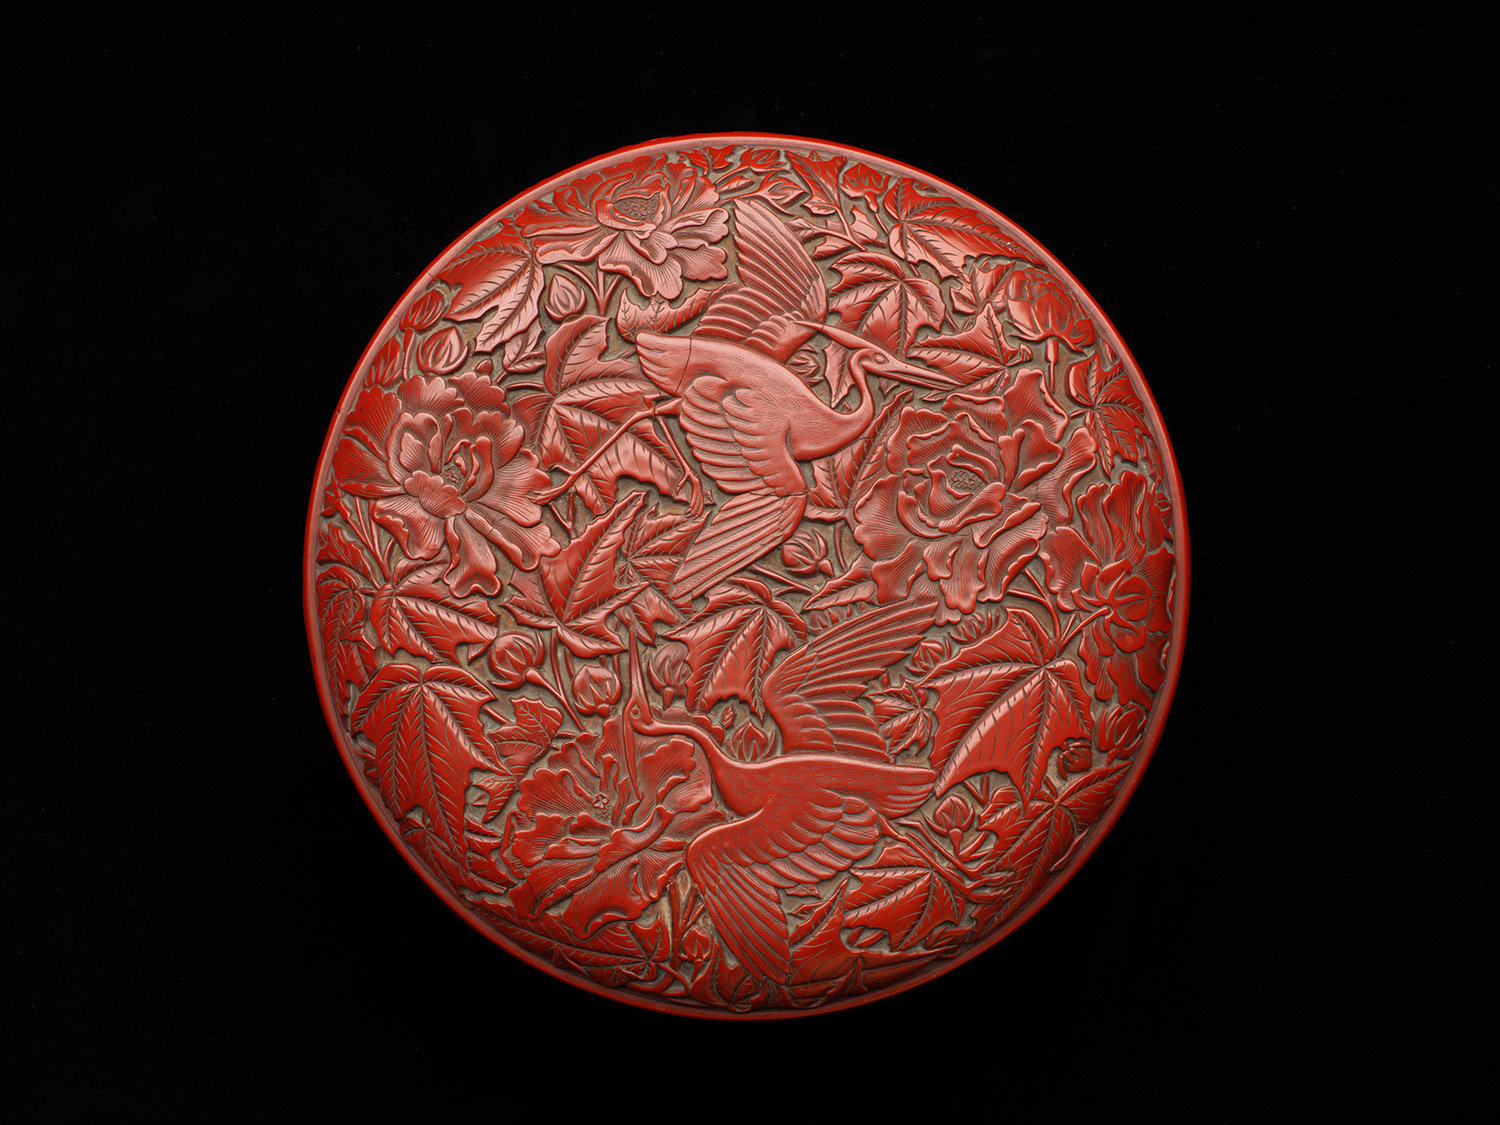 Carved red lacquer box with bird and flower design Marks of "Zhang Cheng zao" and "Yangji"